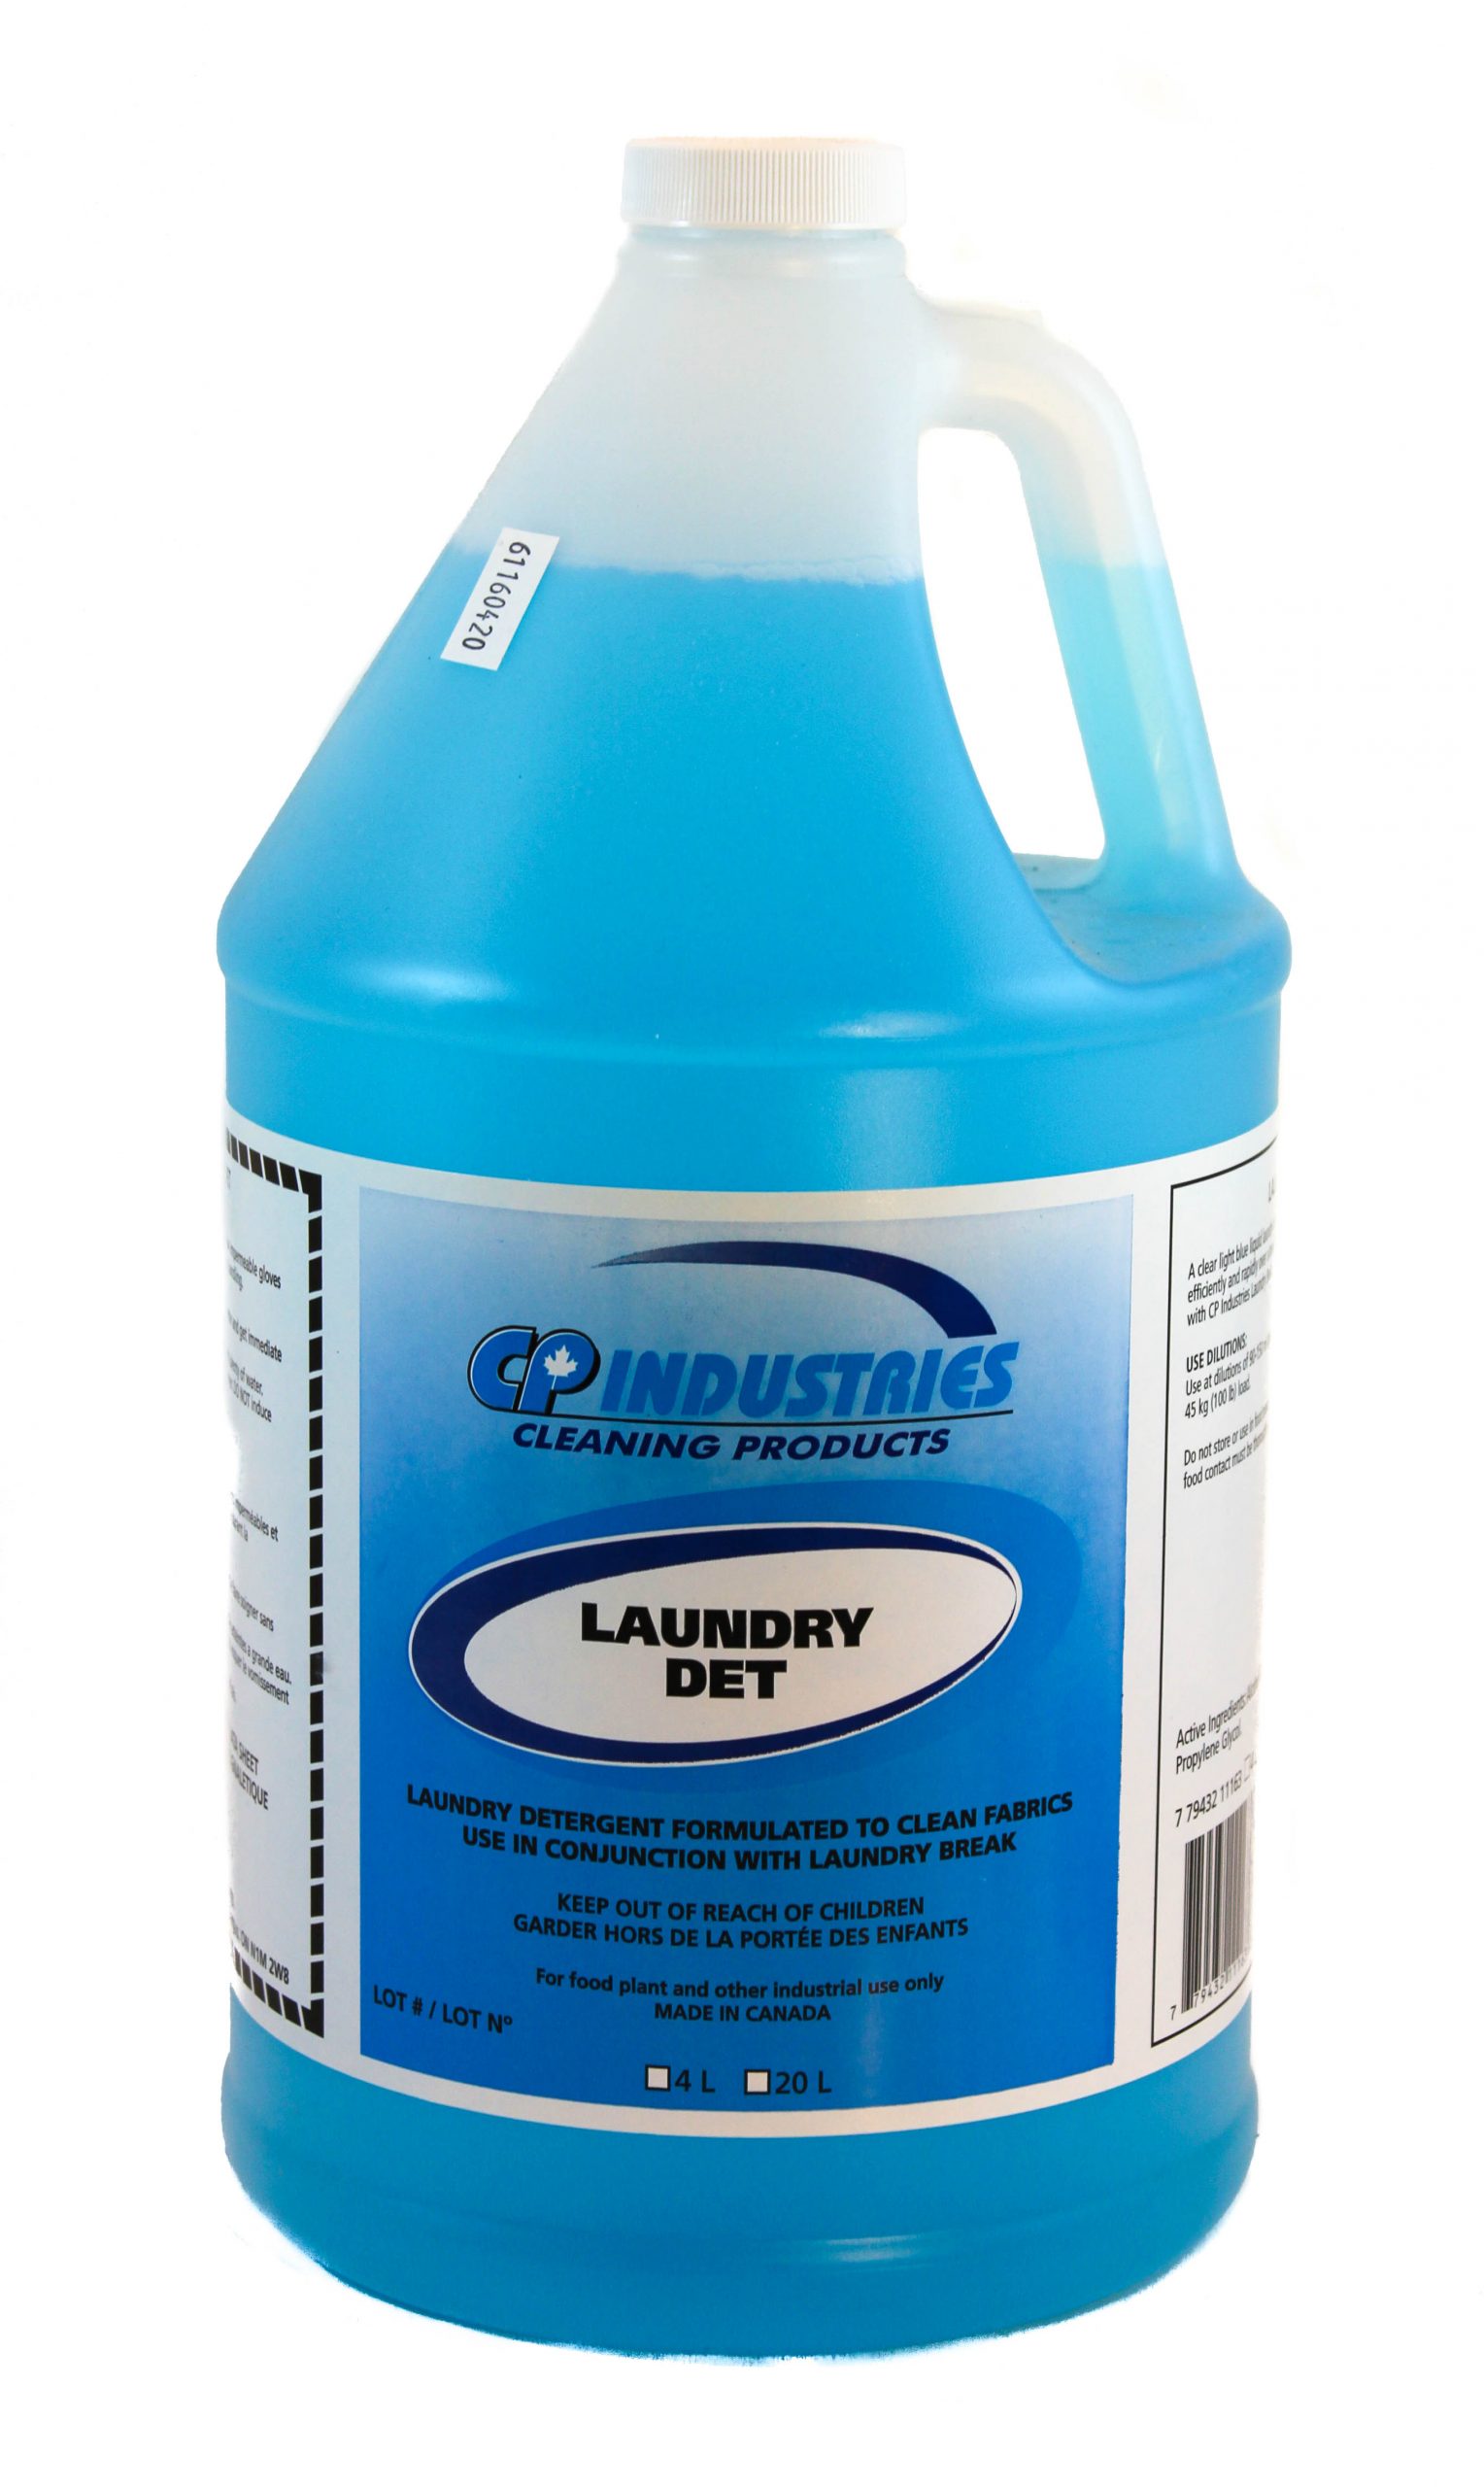 CP Industries: Laundry Det for cleaning fabrics in conjunction with laundry break